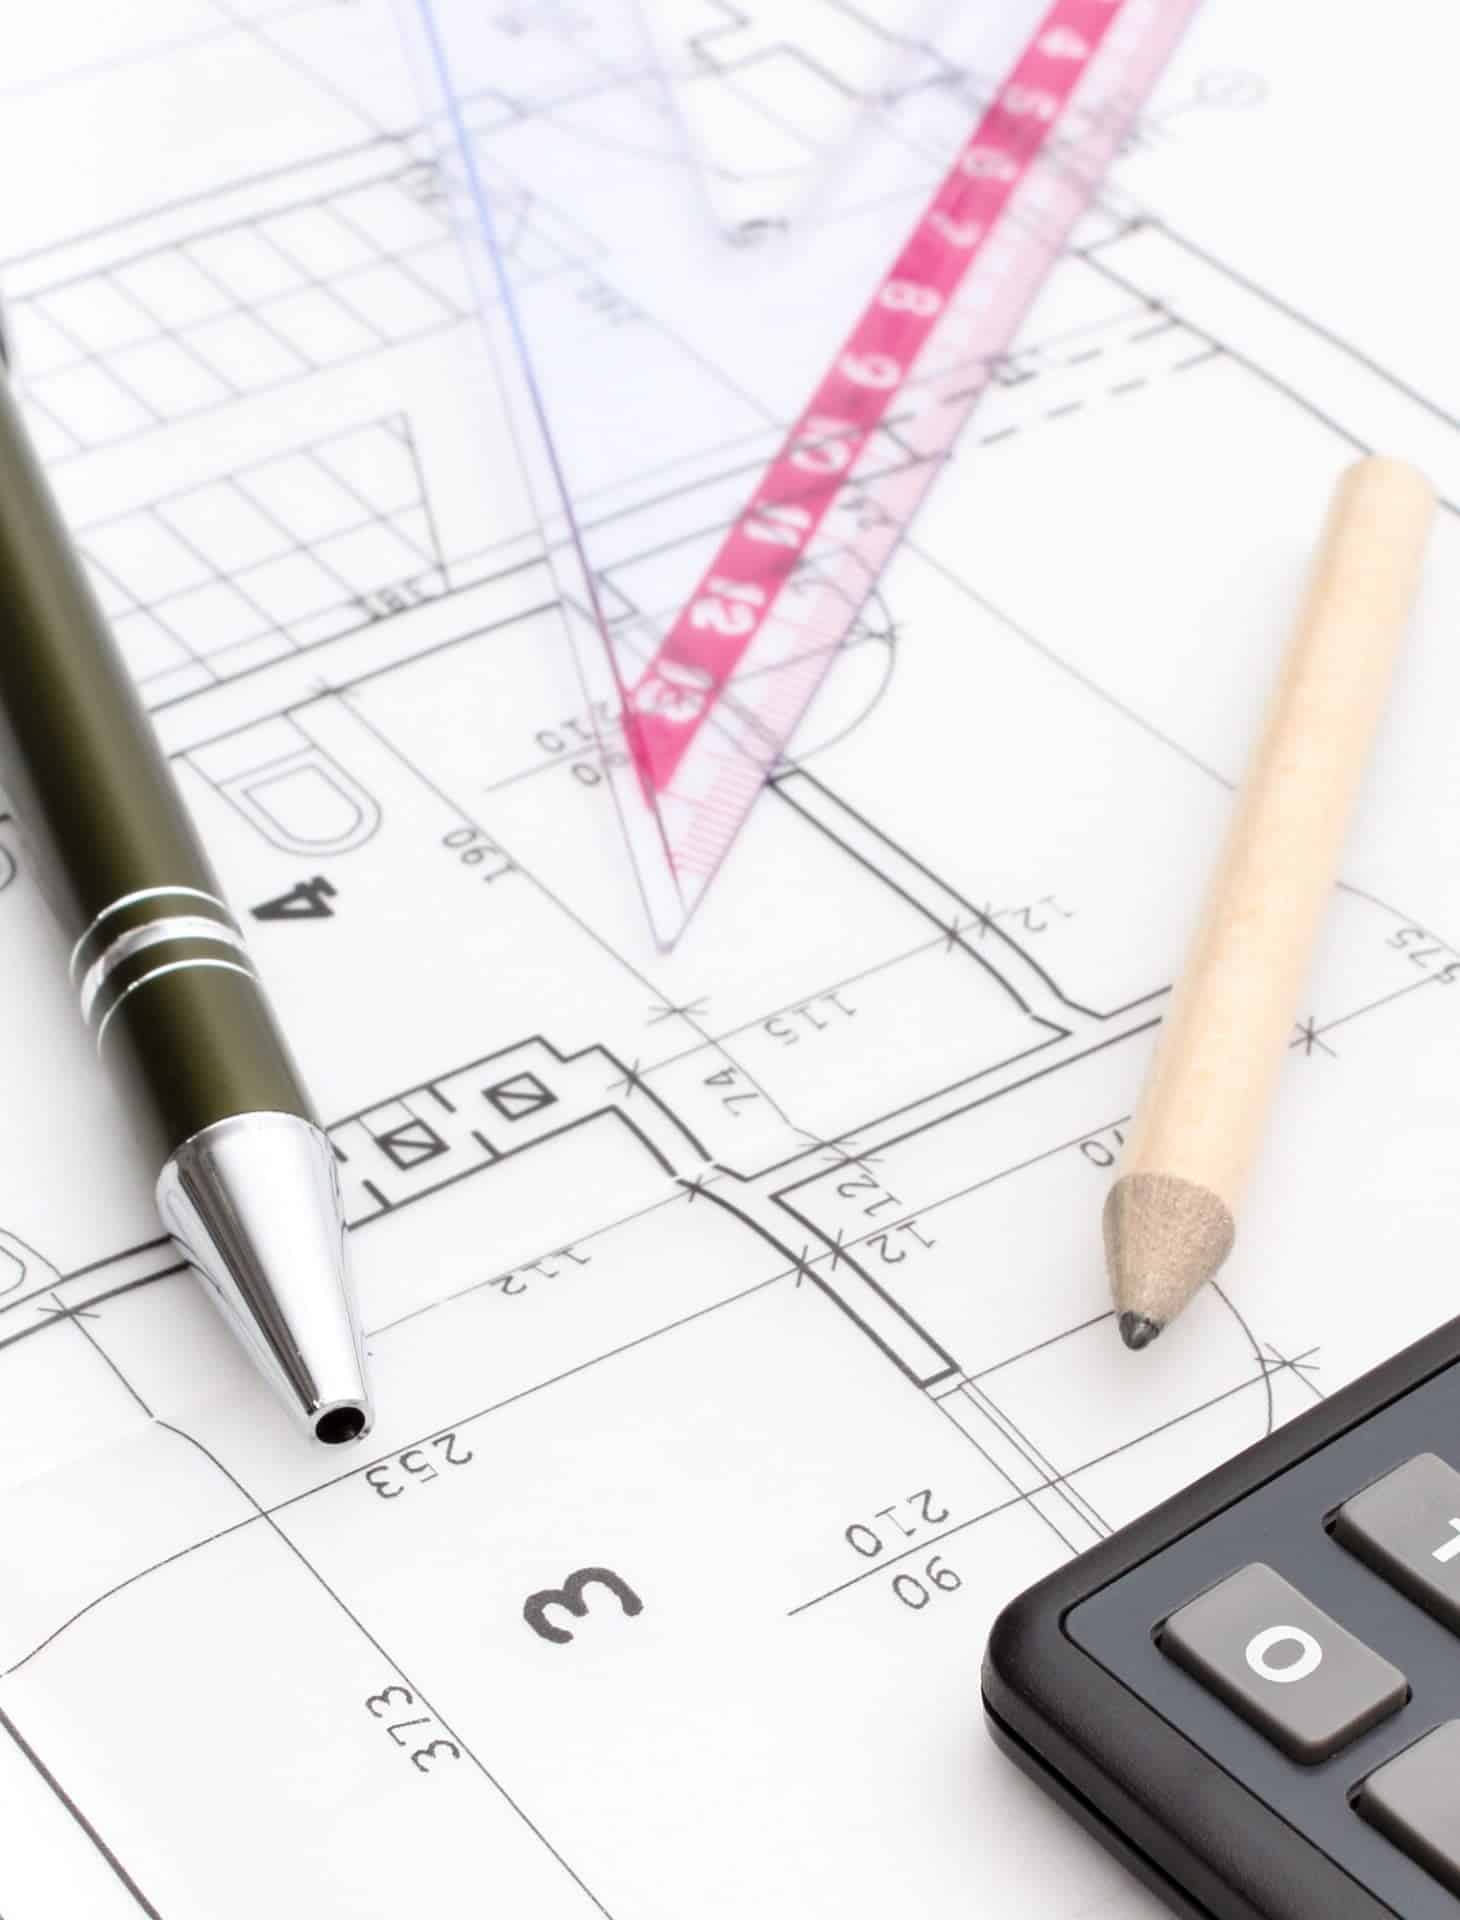 Drawing accesories and calculator on housing plan, building home cost concept